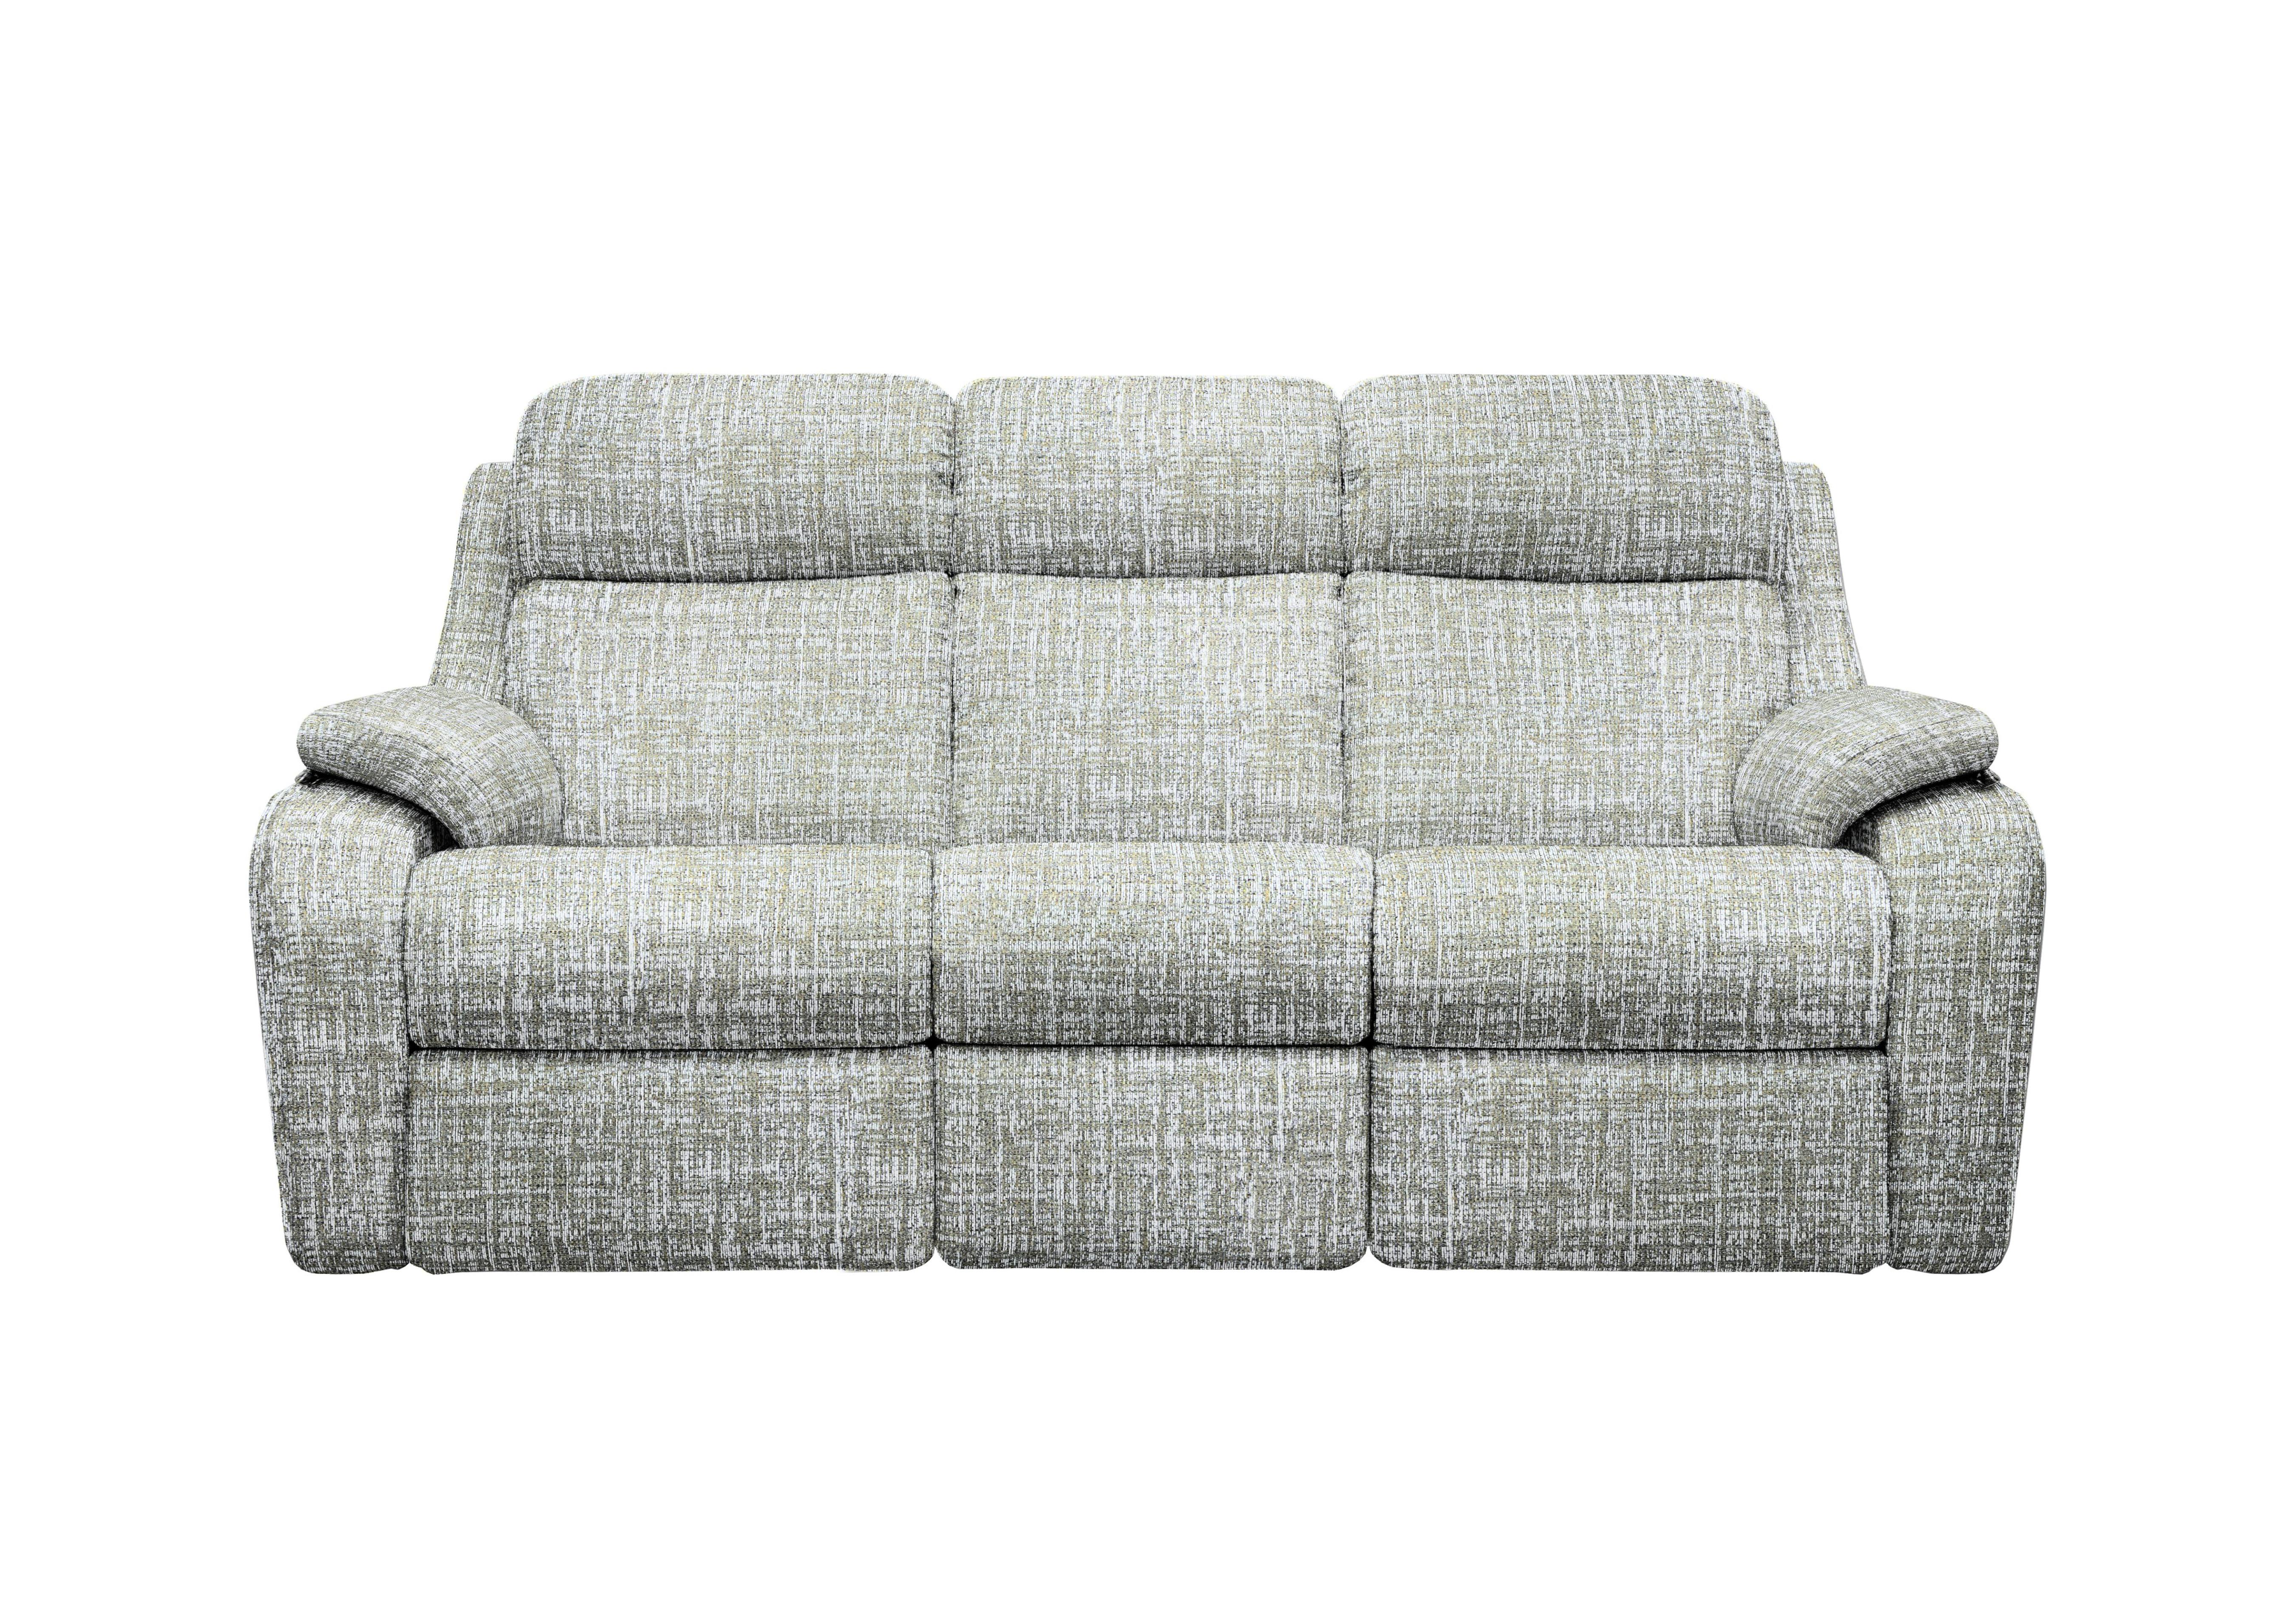 Kingsbury 3 Seater Fabric Power Recliner Sofa with Power Headrests in B102 Shore Oatmeal on Furniture Village